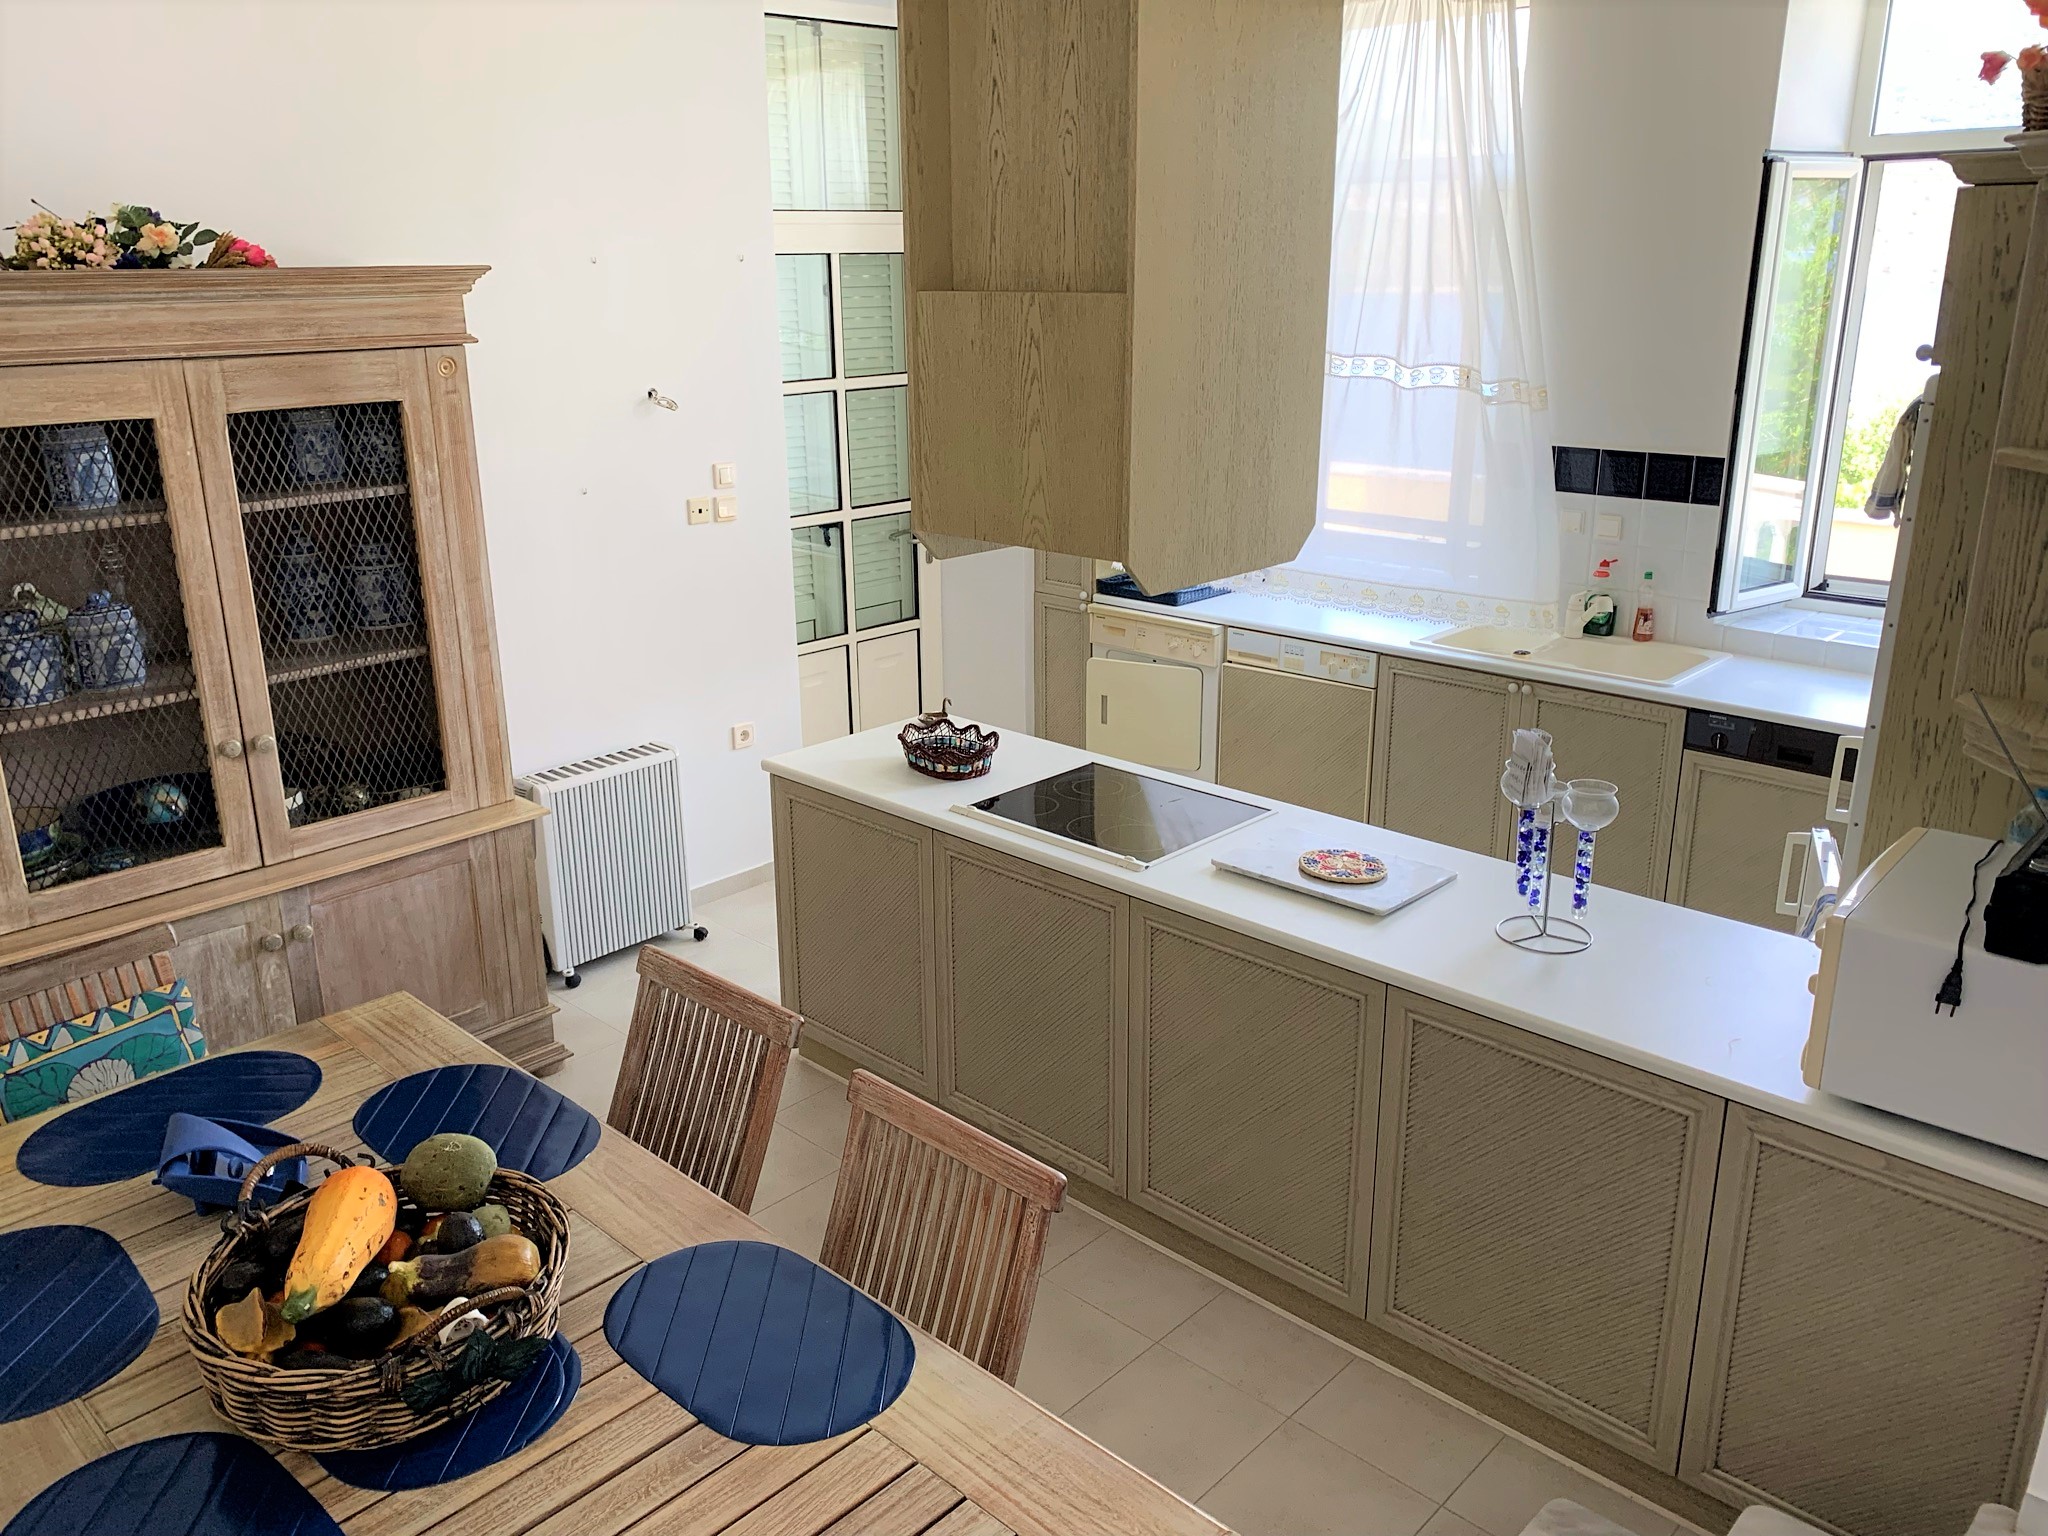 Kitchen of house for rent on Ithaca Greece, Brosta Aetos